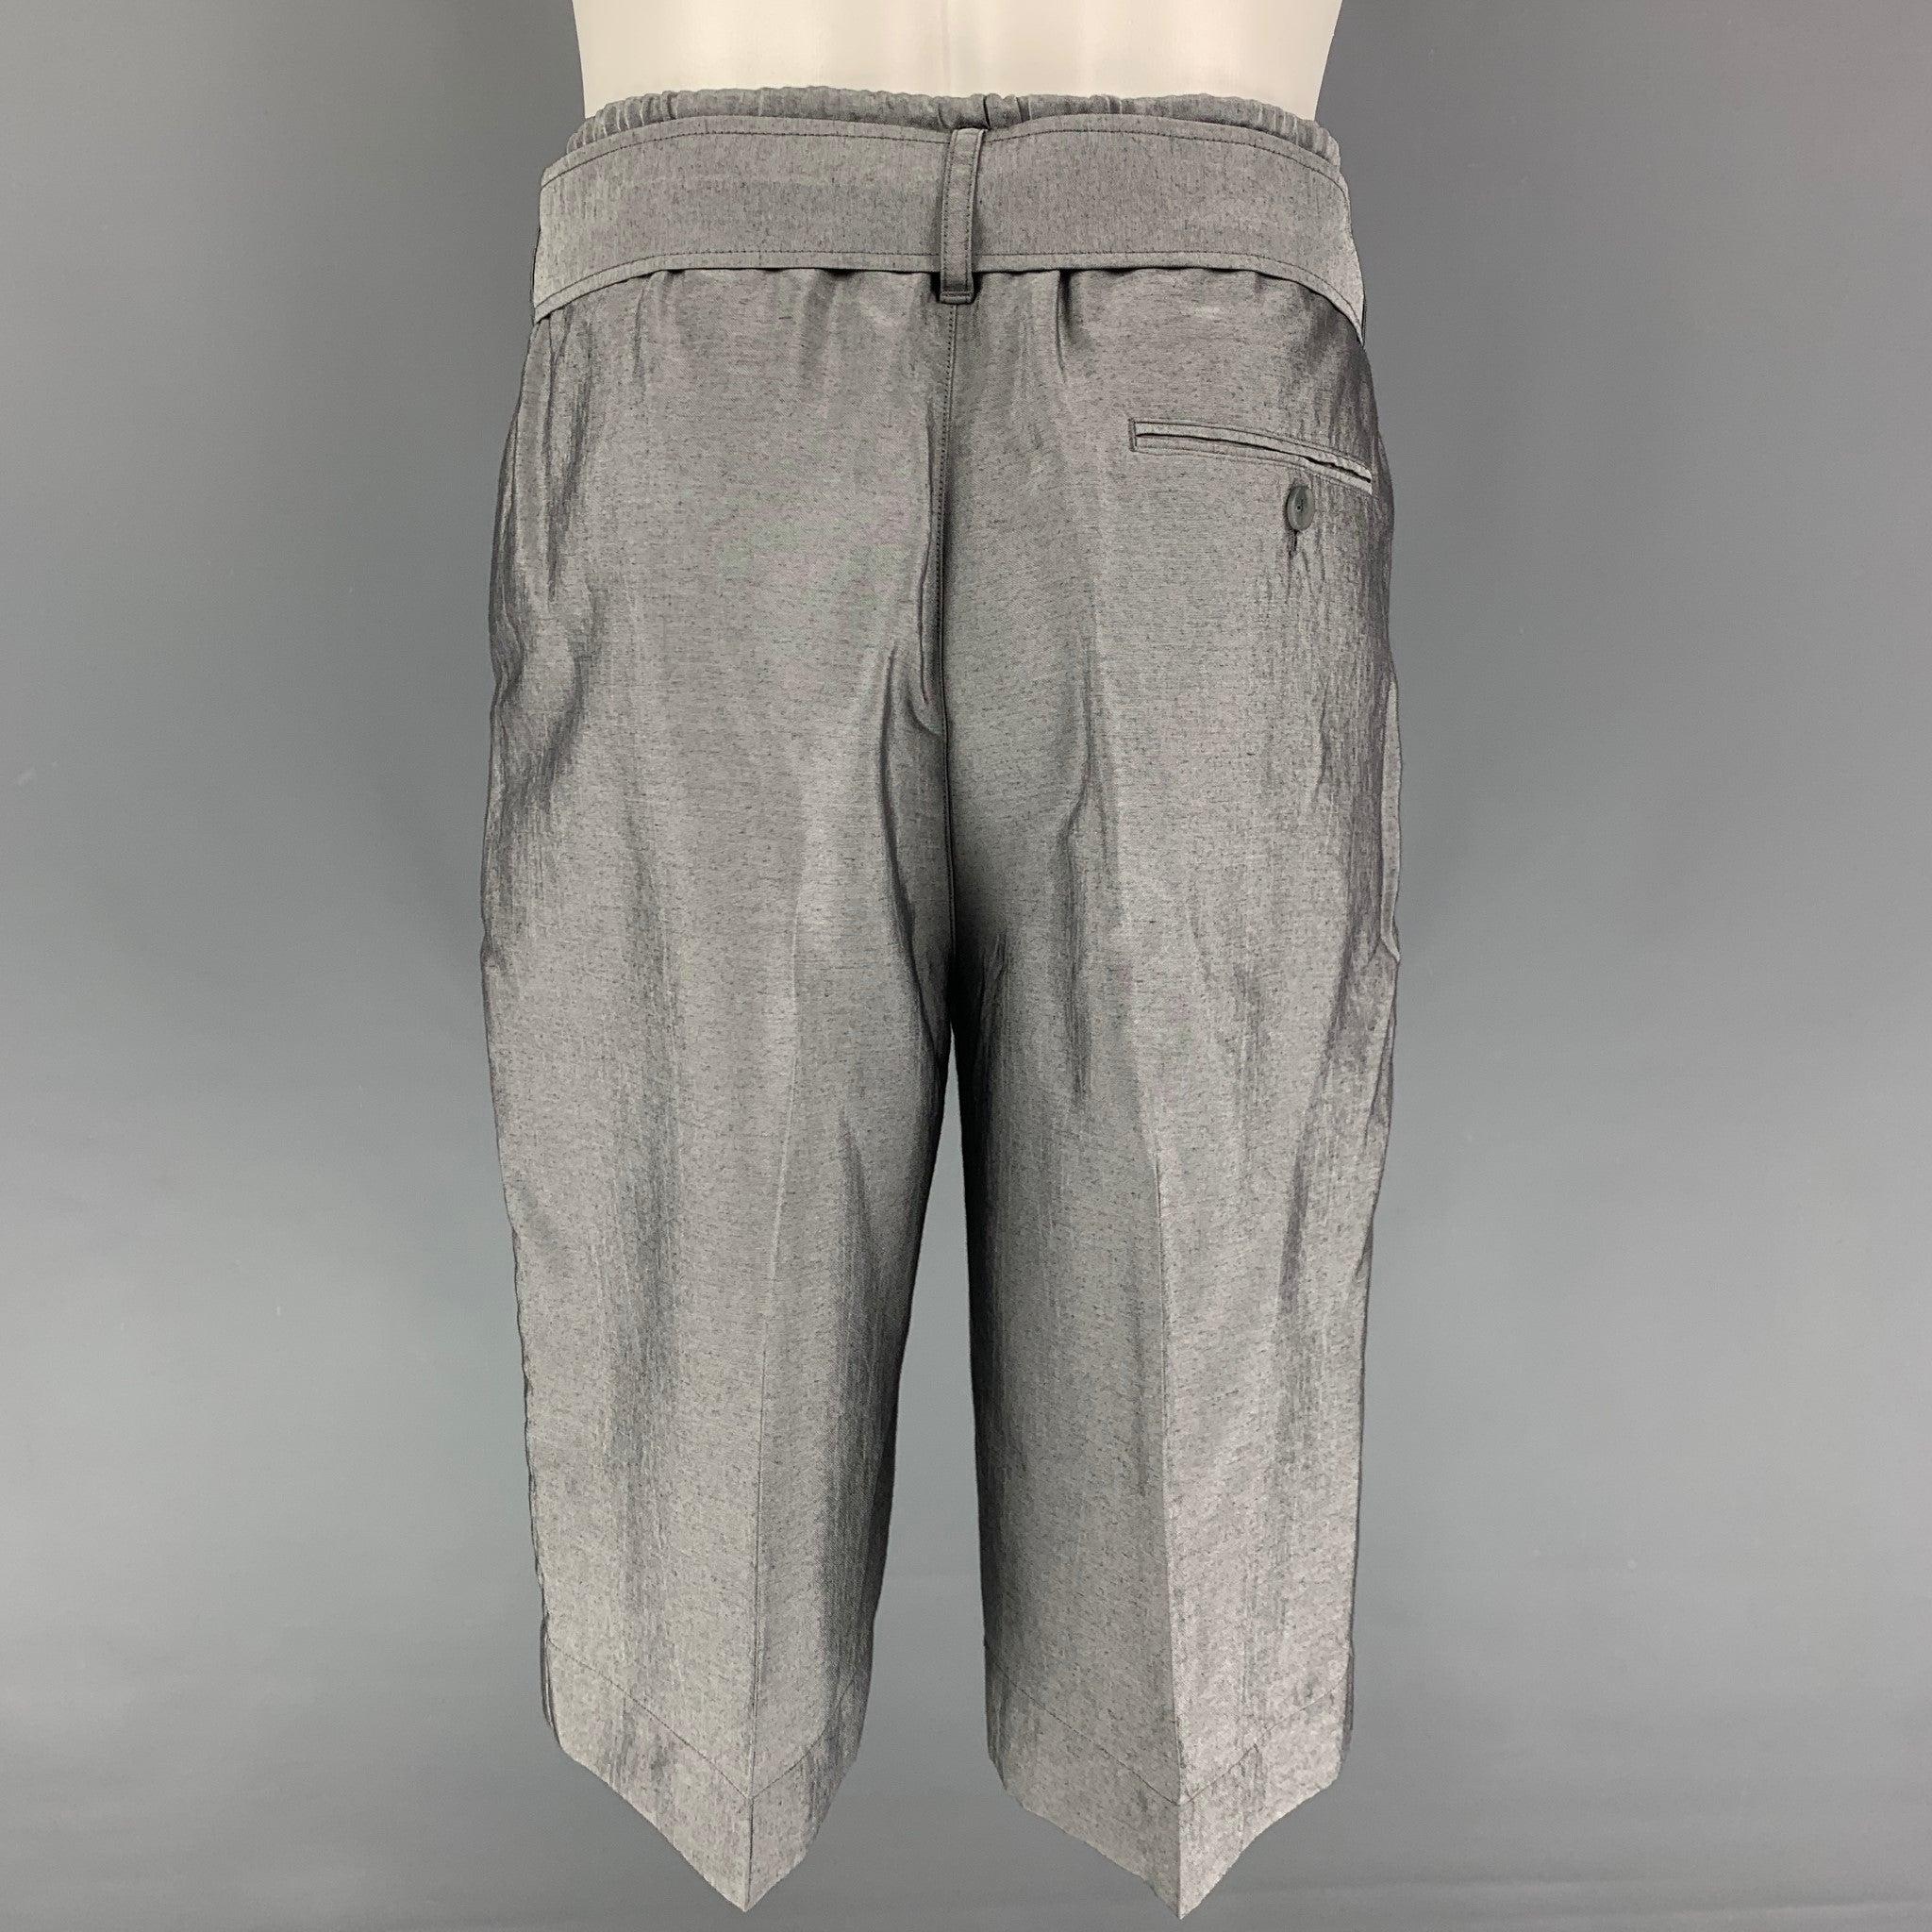 3.1 PHILLIP LIM shorts comes in a silver viscose blend featuring a elastic waistband, belted, and drawstring.
Very Good
Pre-Owned Condition. 

Marked:   31 

Measurements: 
  Waist: 31 inches  Rise: 13 inches Inseam: 12.5 inches 
  
  
 
Reference: